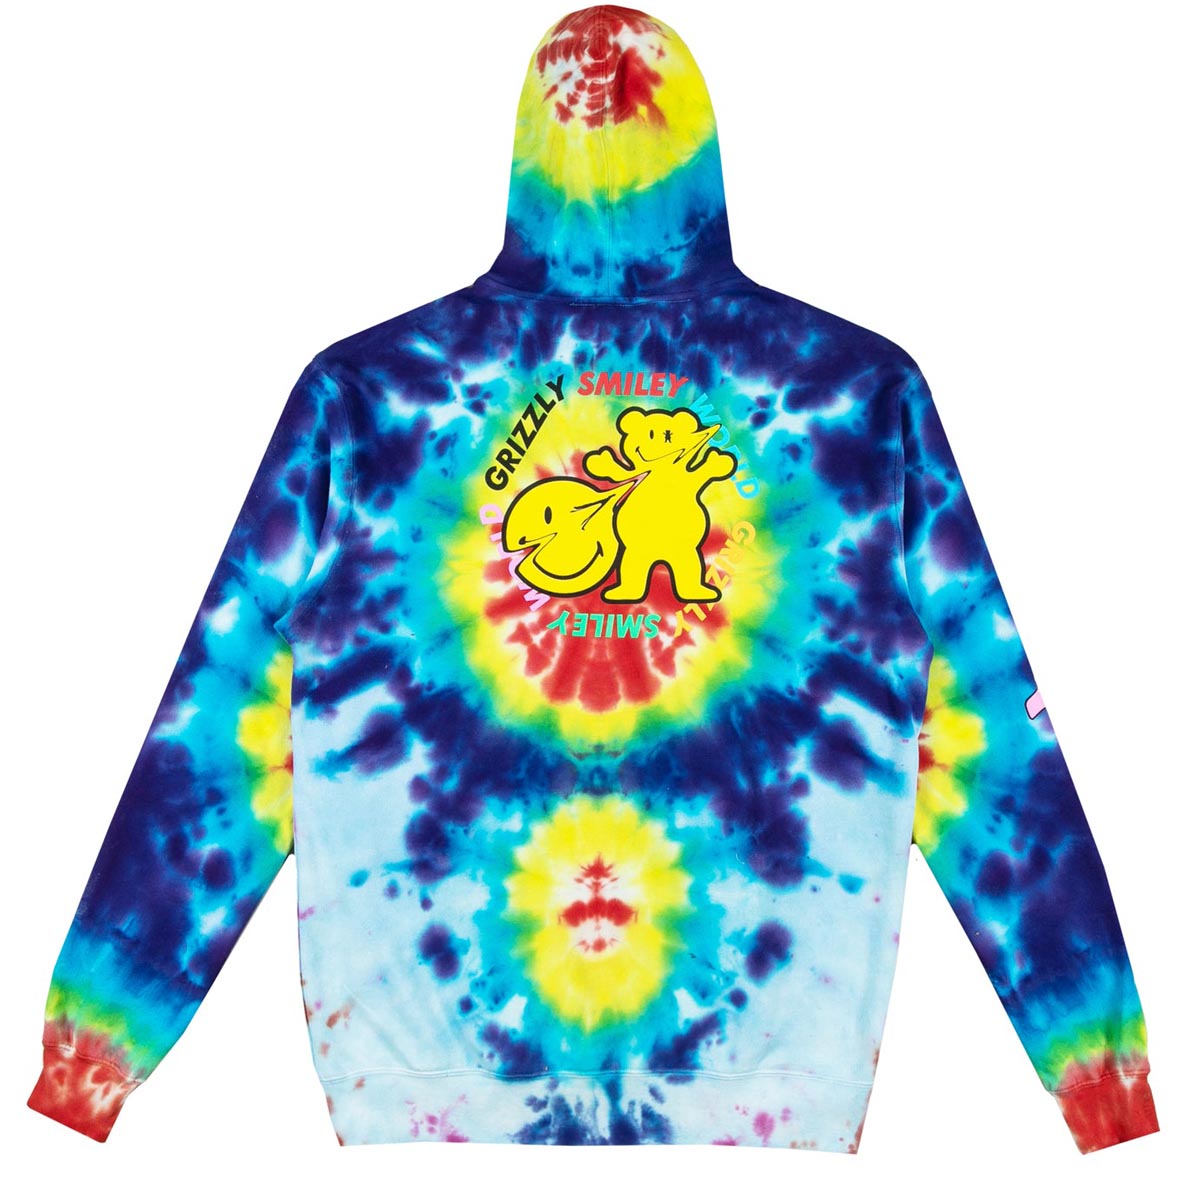 Grizzly x Smiley World Hoodie - Tie Dye image 2